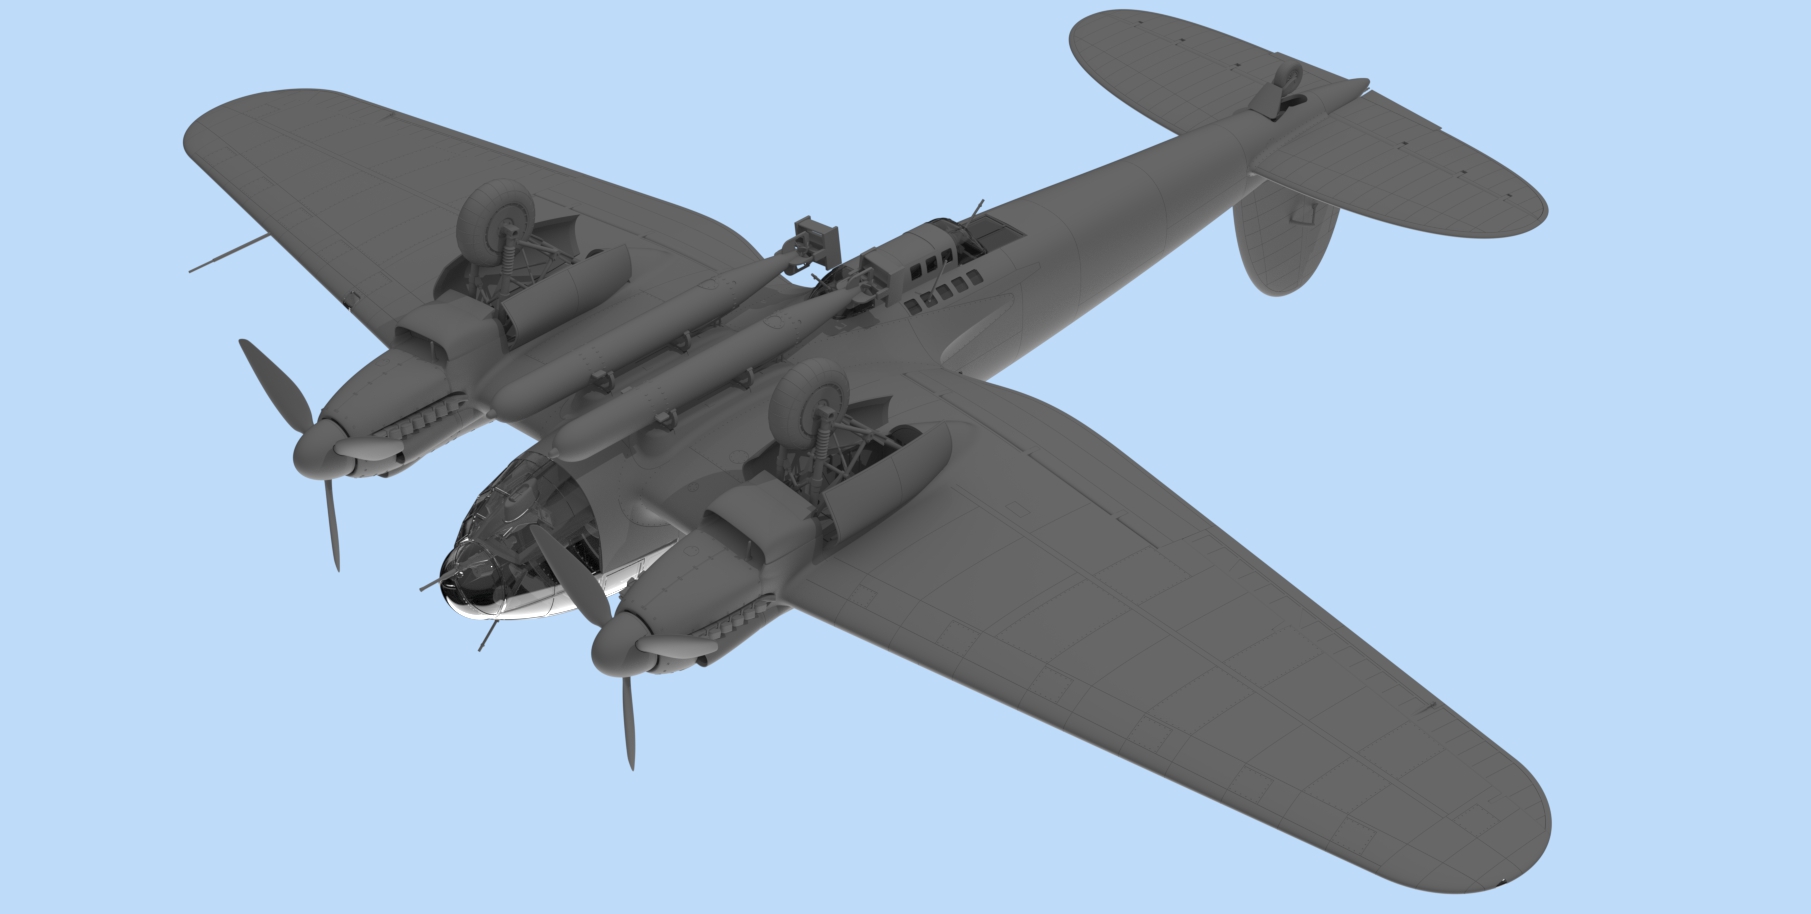 1/48 He 111H-6 North Africa, WWII German Bomber 48265